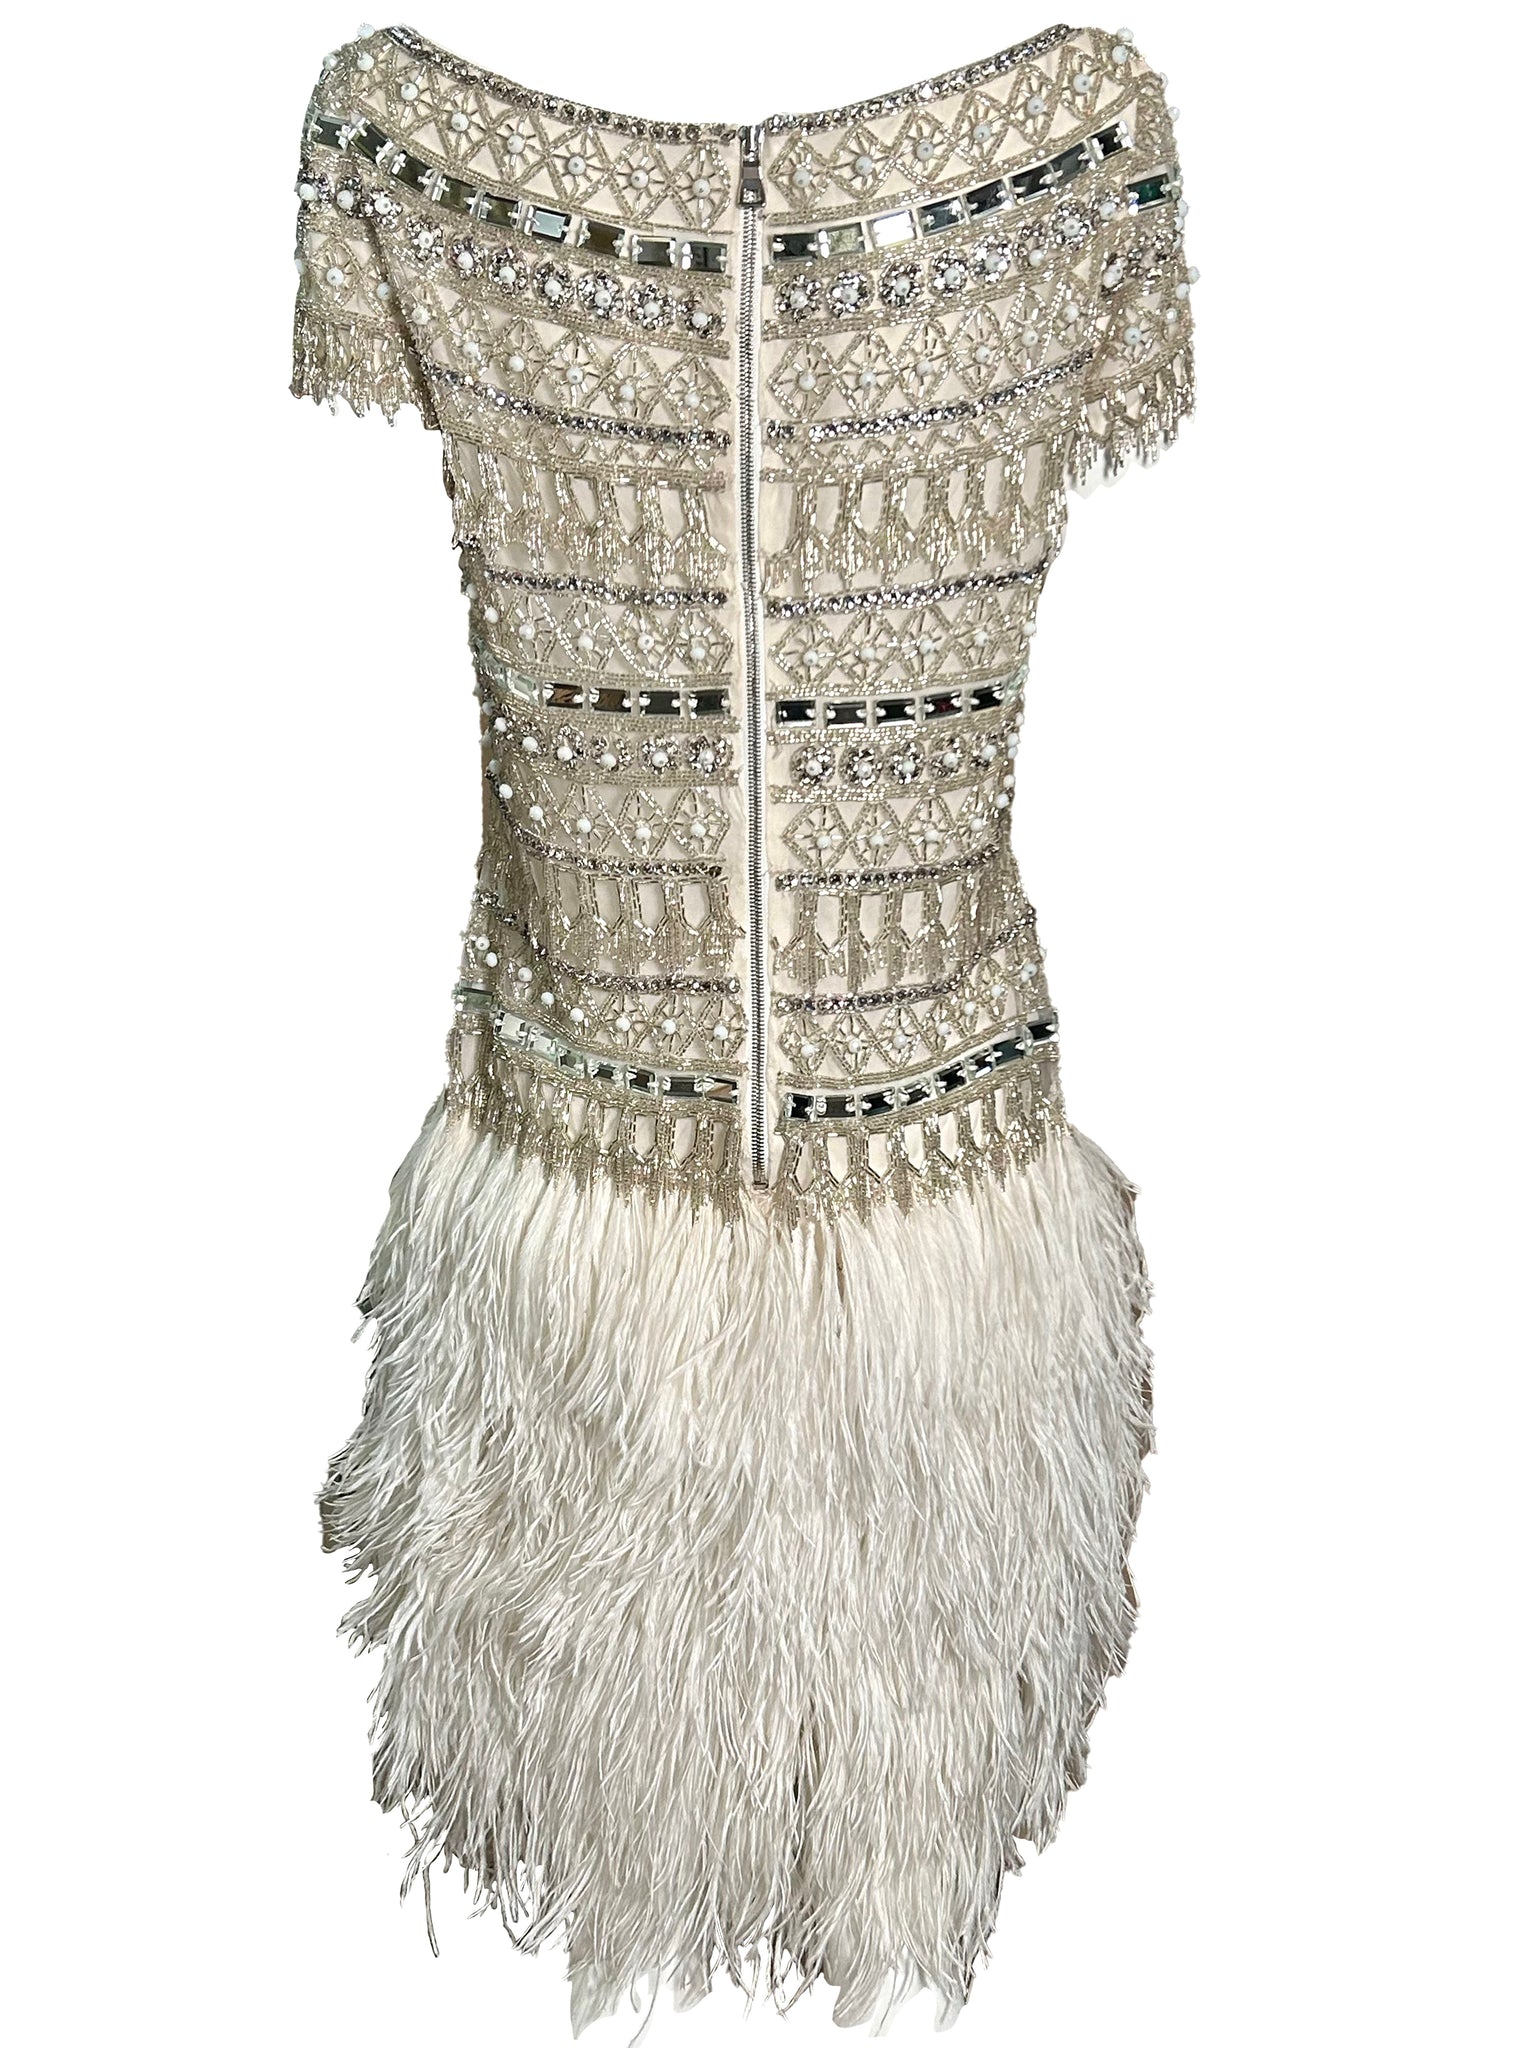  Naeem Khan 2014 White Sequin and Beaded Cocktail Dress with Feathers BACK 3 of 7